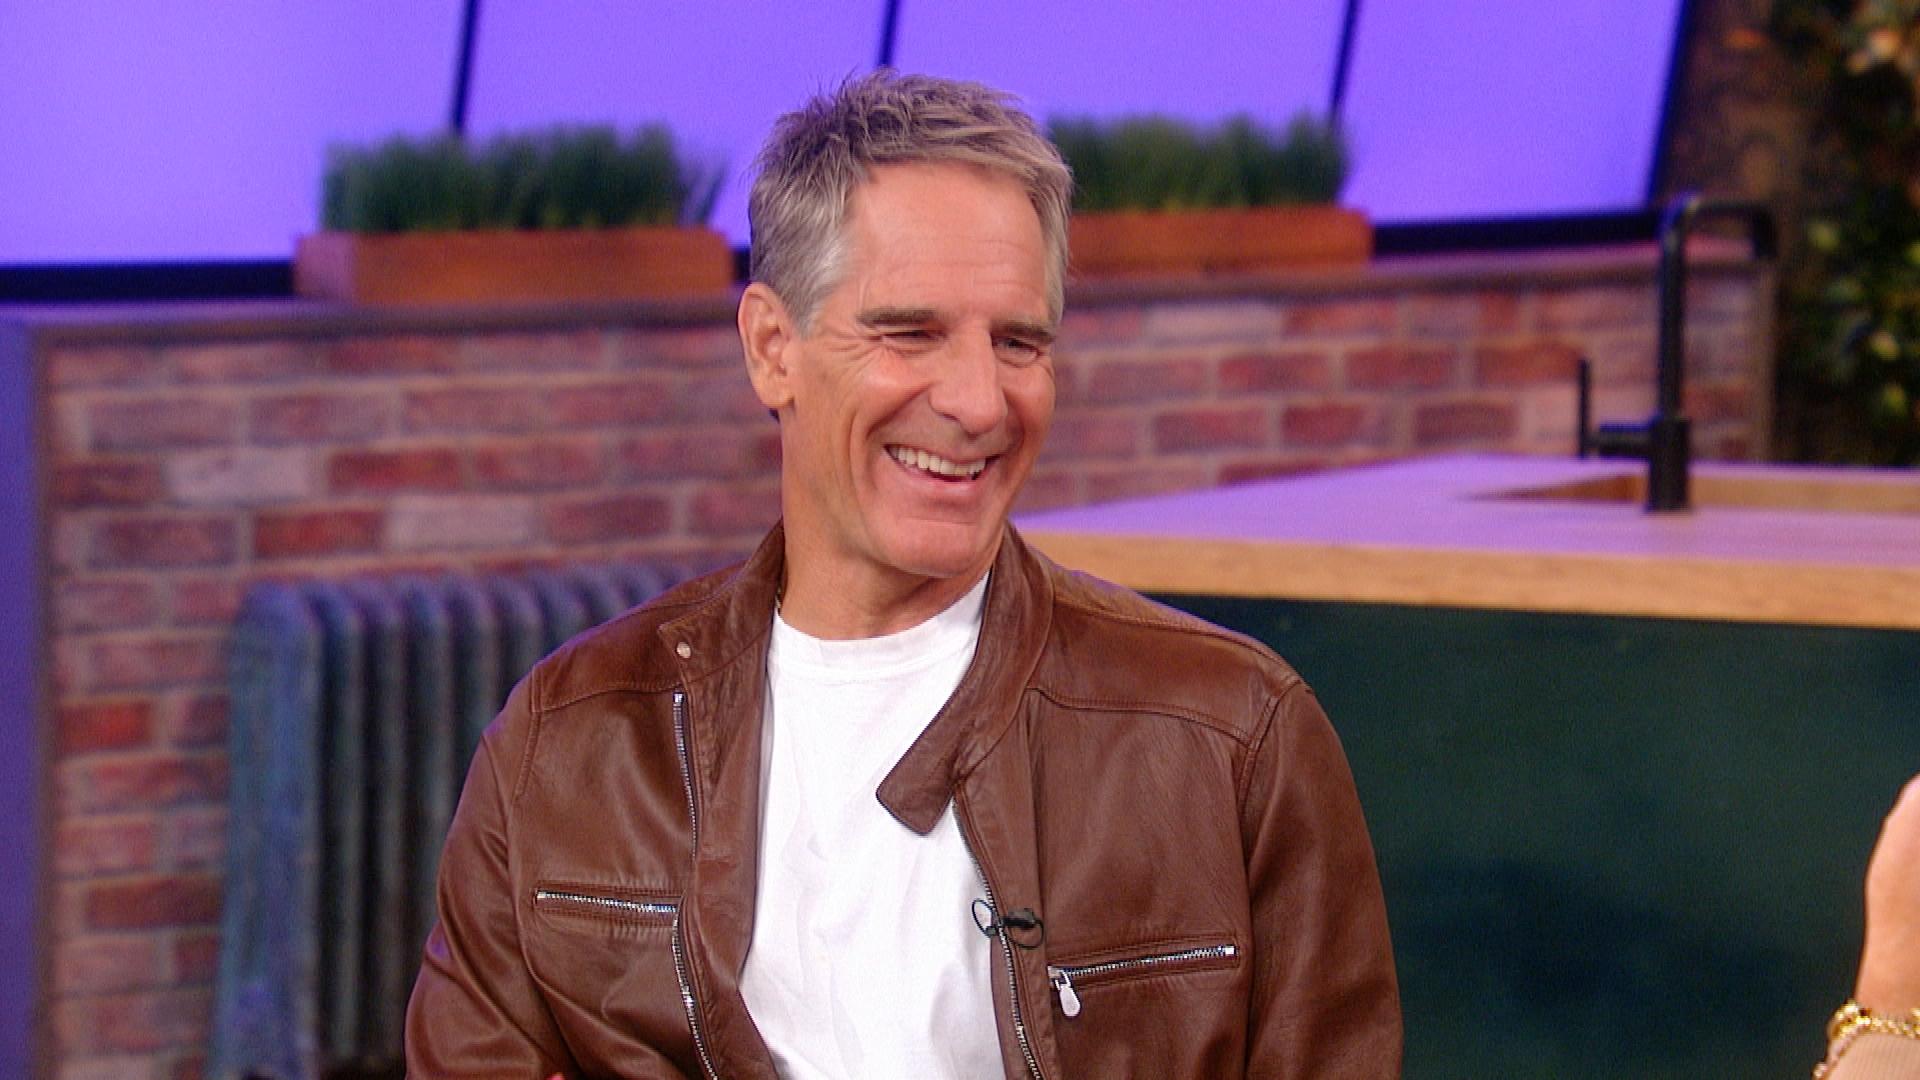 Chelsea Field Eith Husband Scott Bakula And Their Two Sons Wil